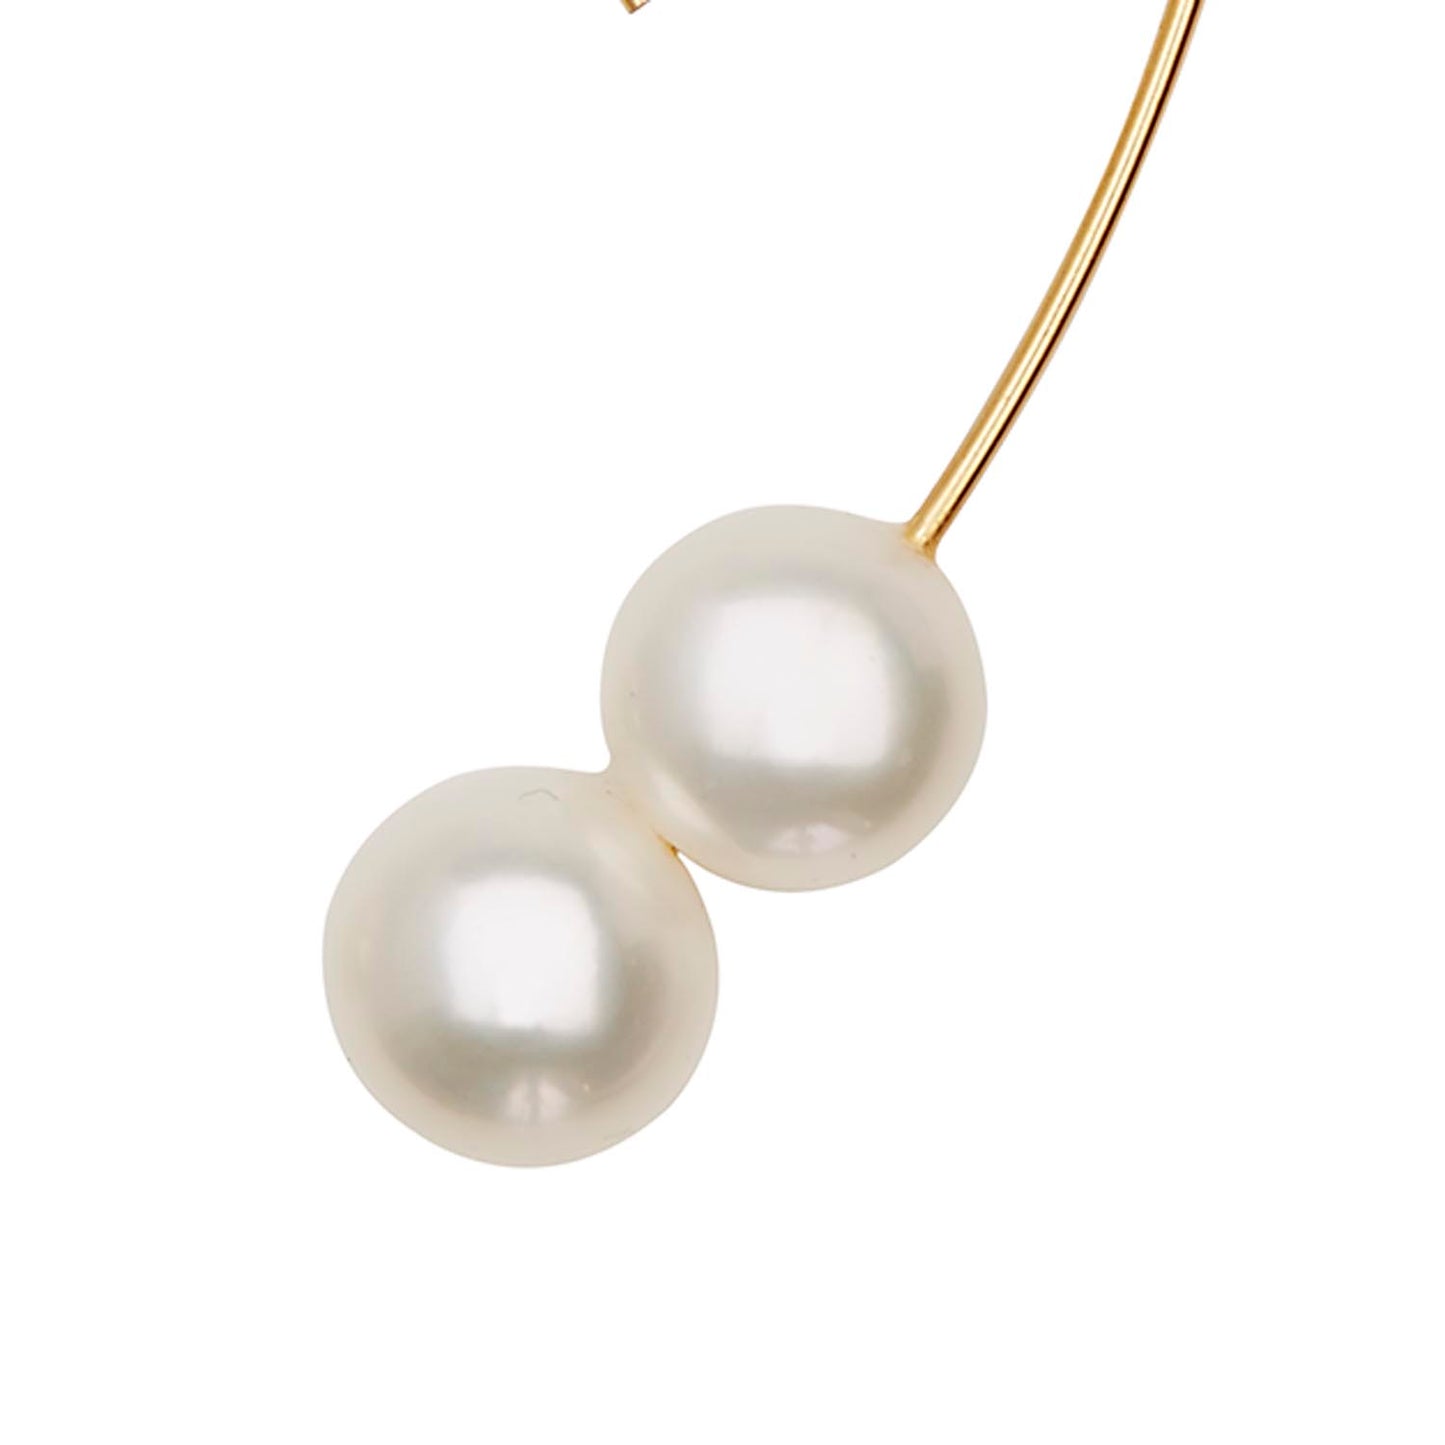 Angled Curve Earrings with White Pearls